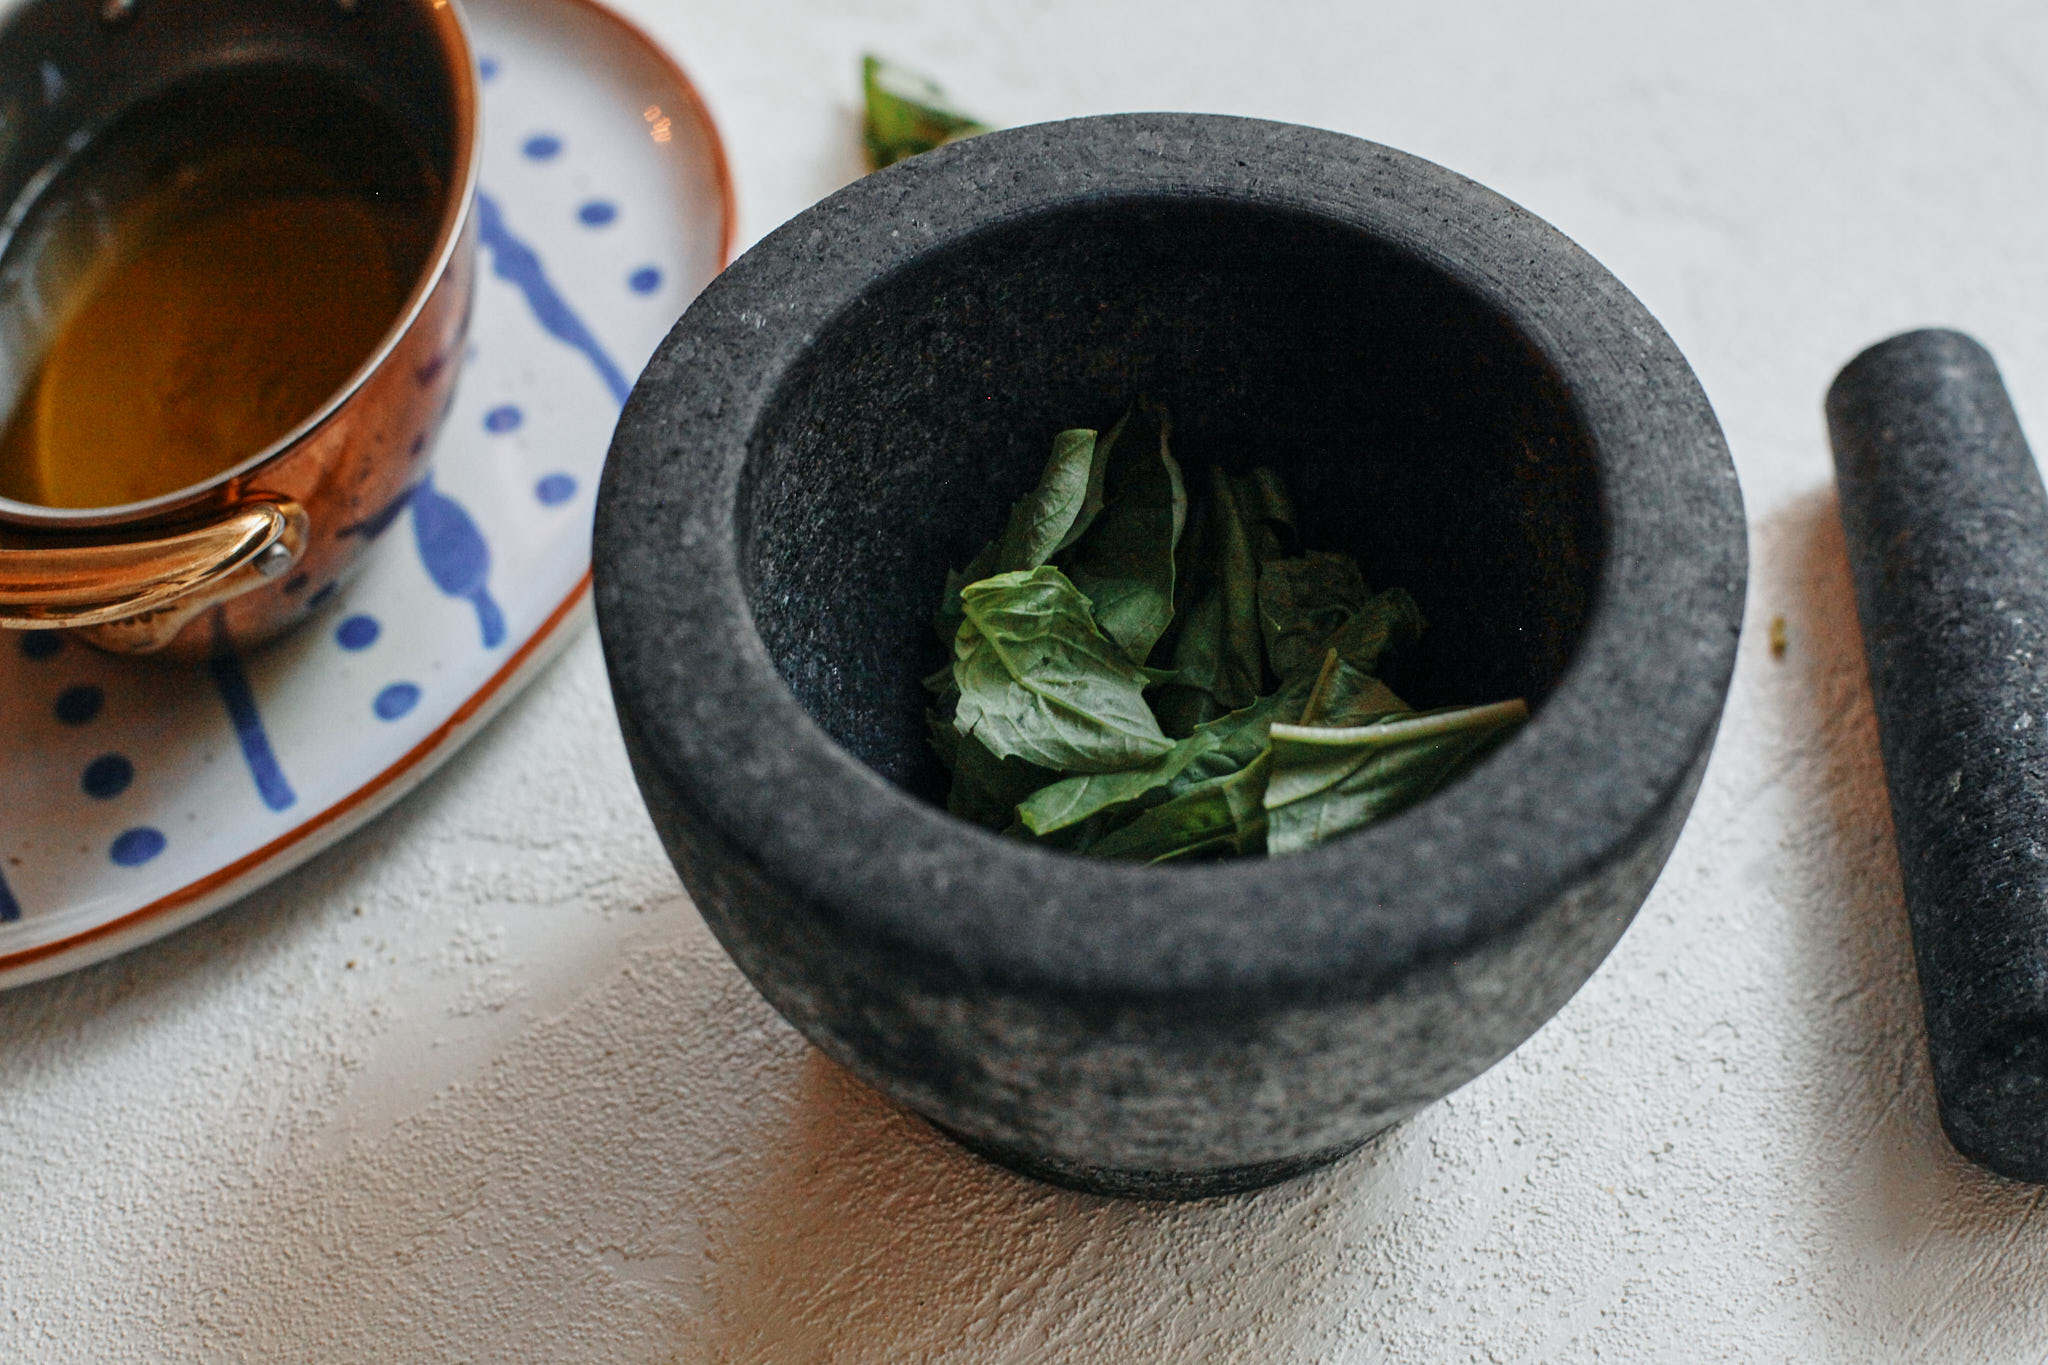 basil in a mortar and pestle about to be made into a basil oil